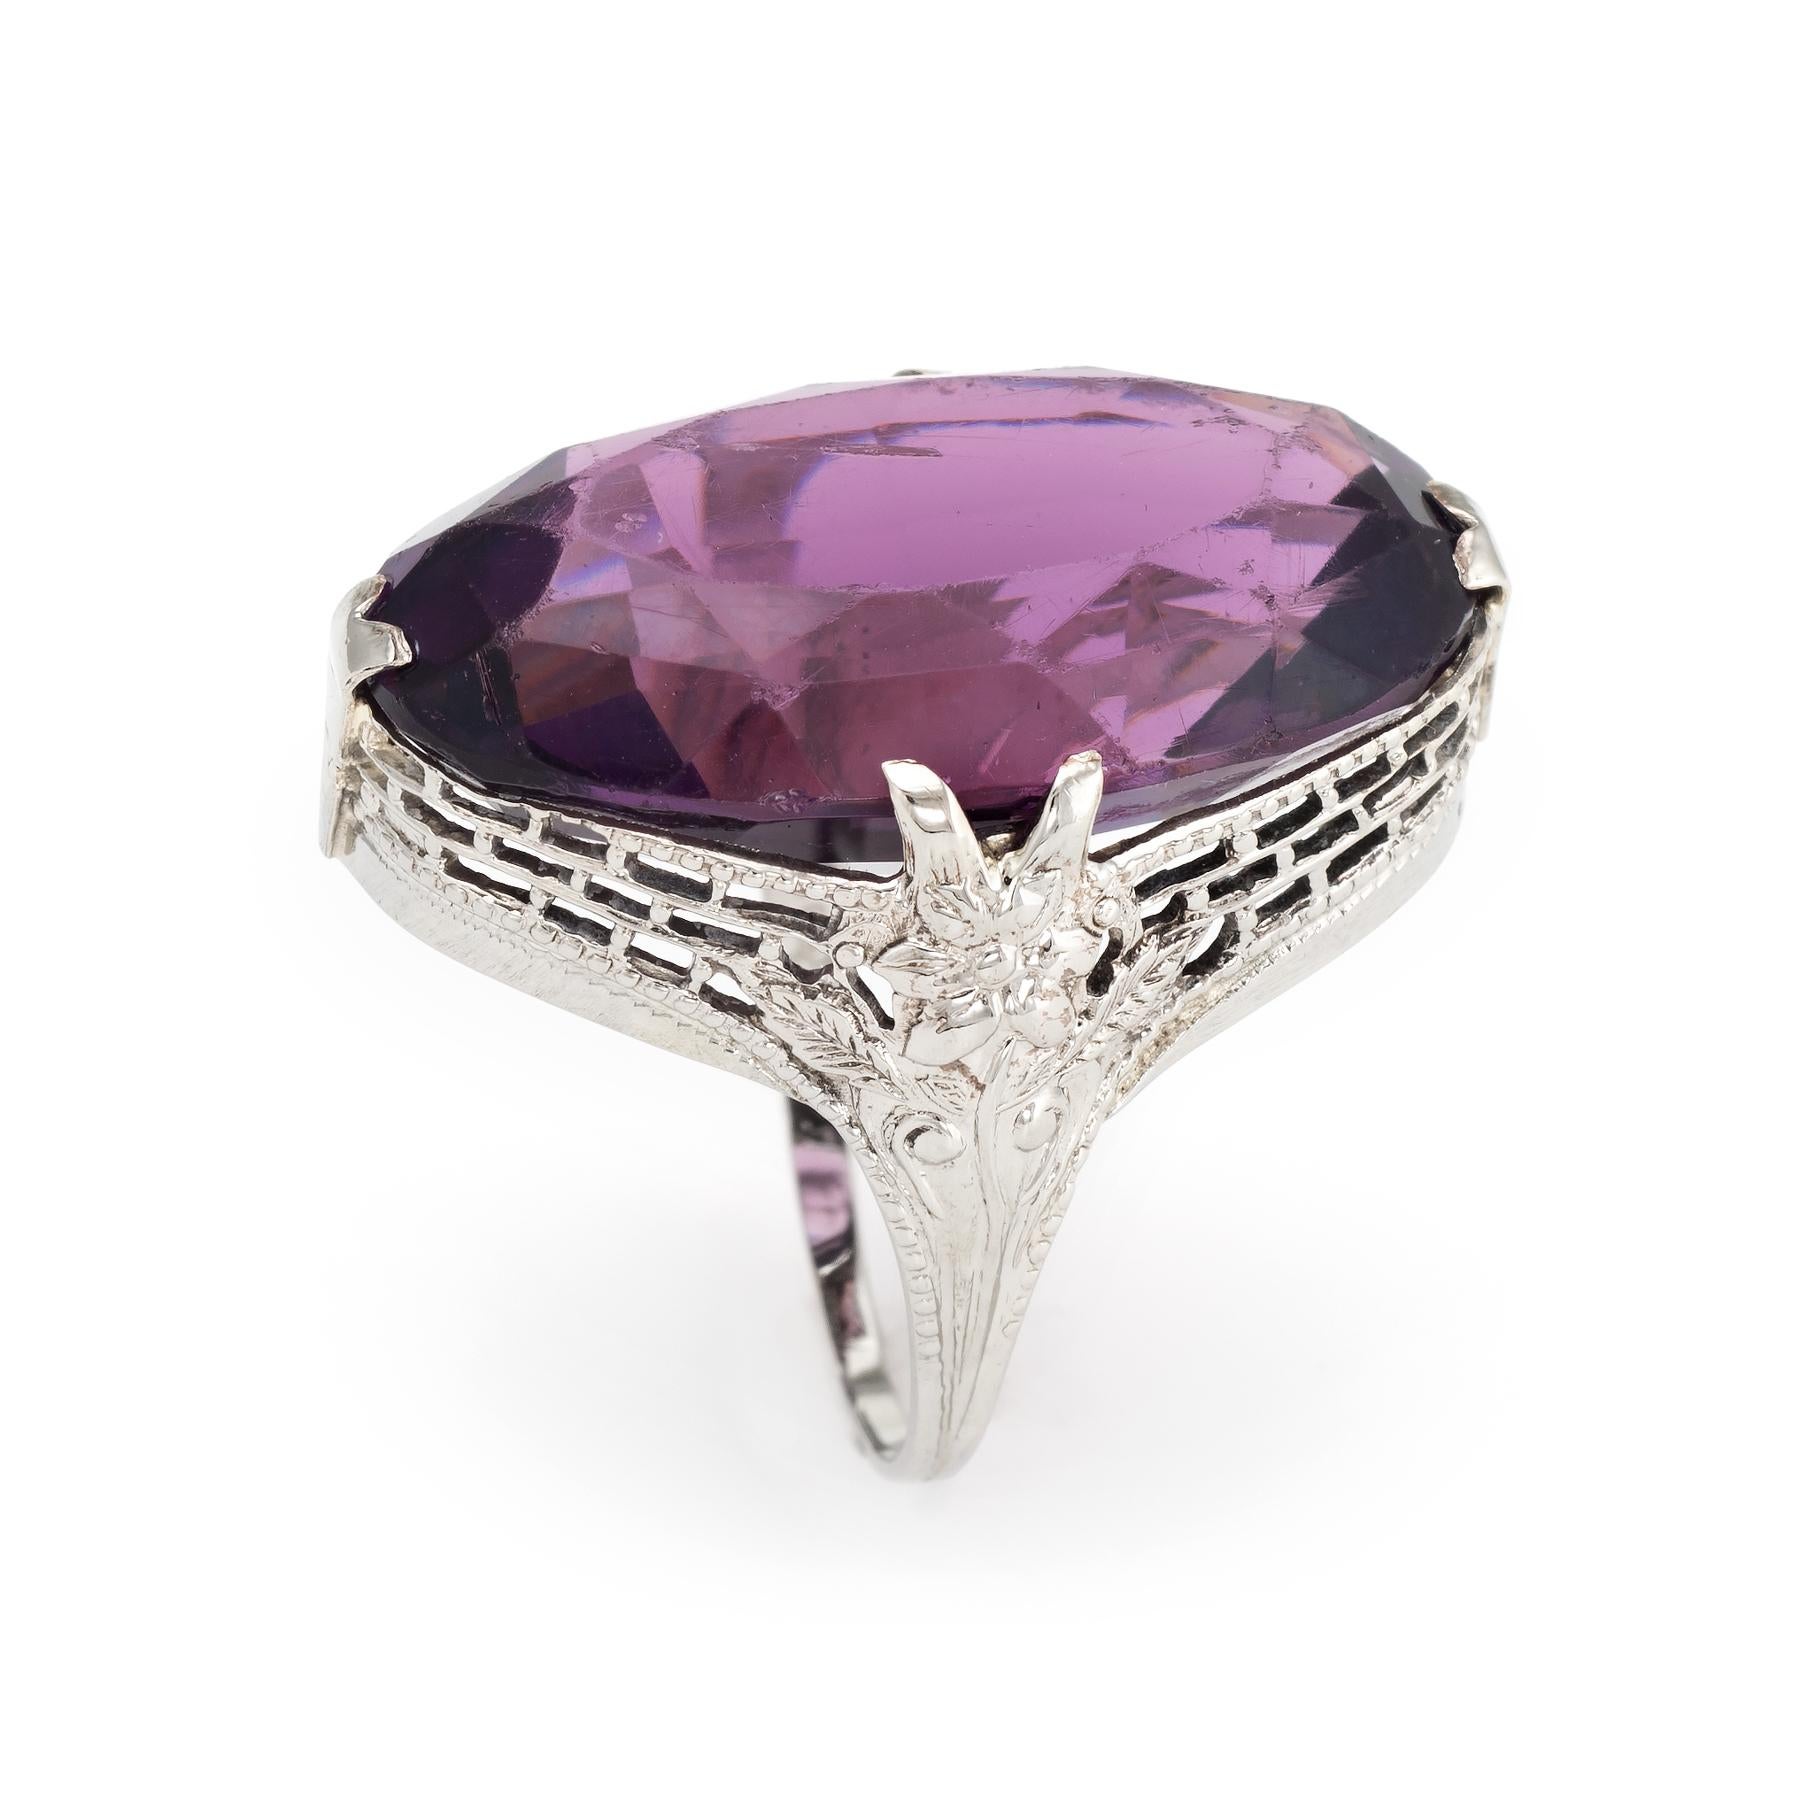 Finely detailed vintage Art Deco era cocktail ring (circa 1920s to 1930s), crafted in 10 karat white gold. 

Centrally mounted amethyst glass measures 23mm x 15mm (estimated at 25 carats). The amethyst is in good condition with wear evident (light